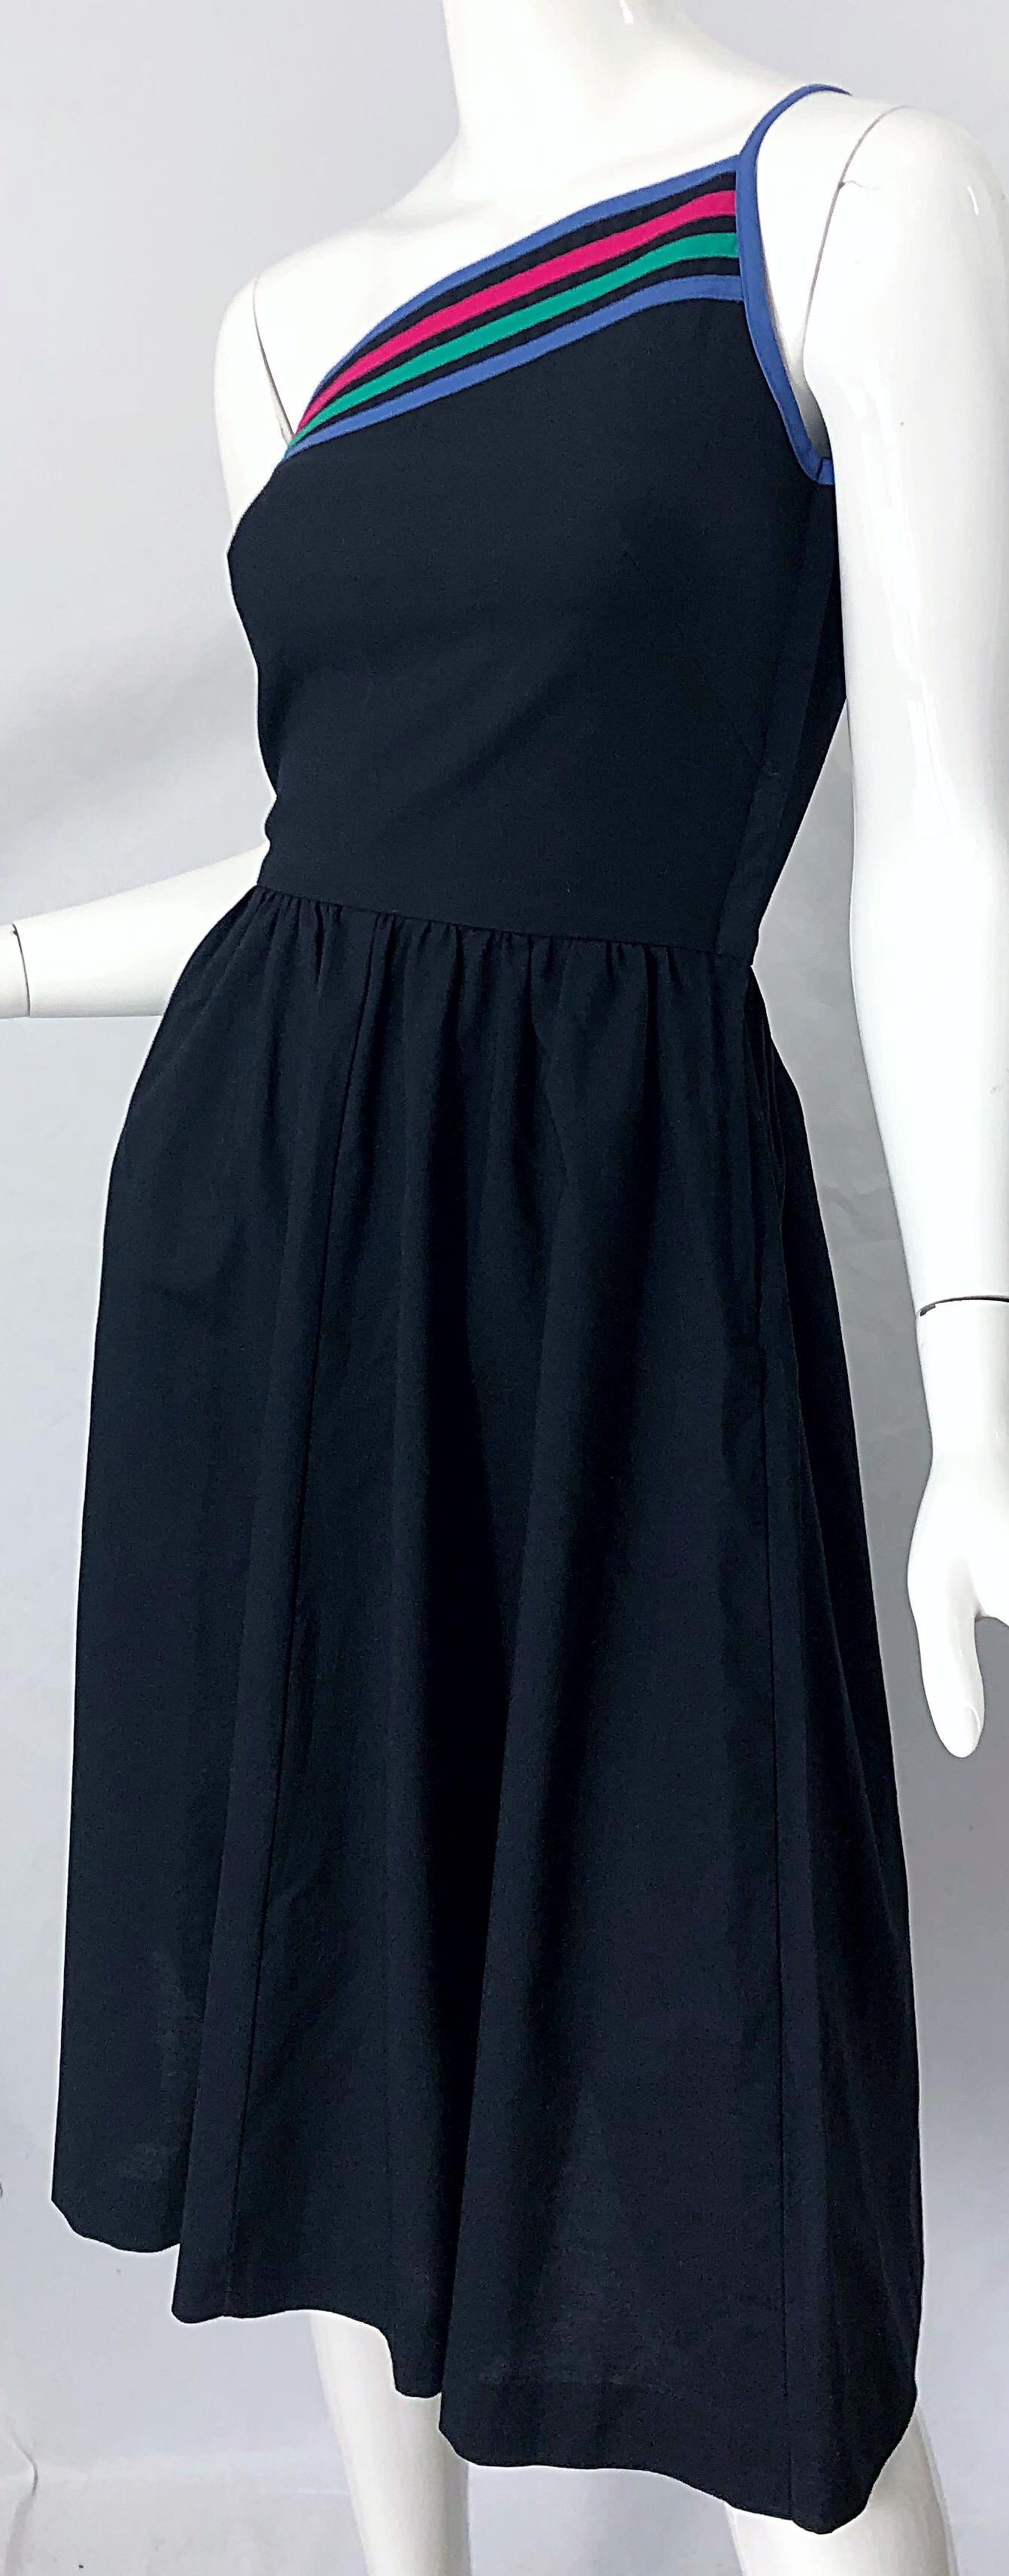 1980s Black One Shoulder Cotton Fit n ' Flare Vintage 80s Striped Dress In Excellent Condition For Sale In San Diego, CA